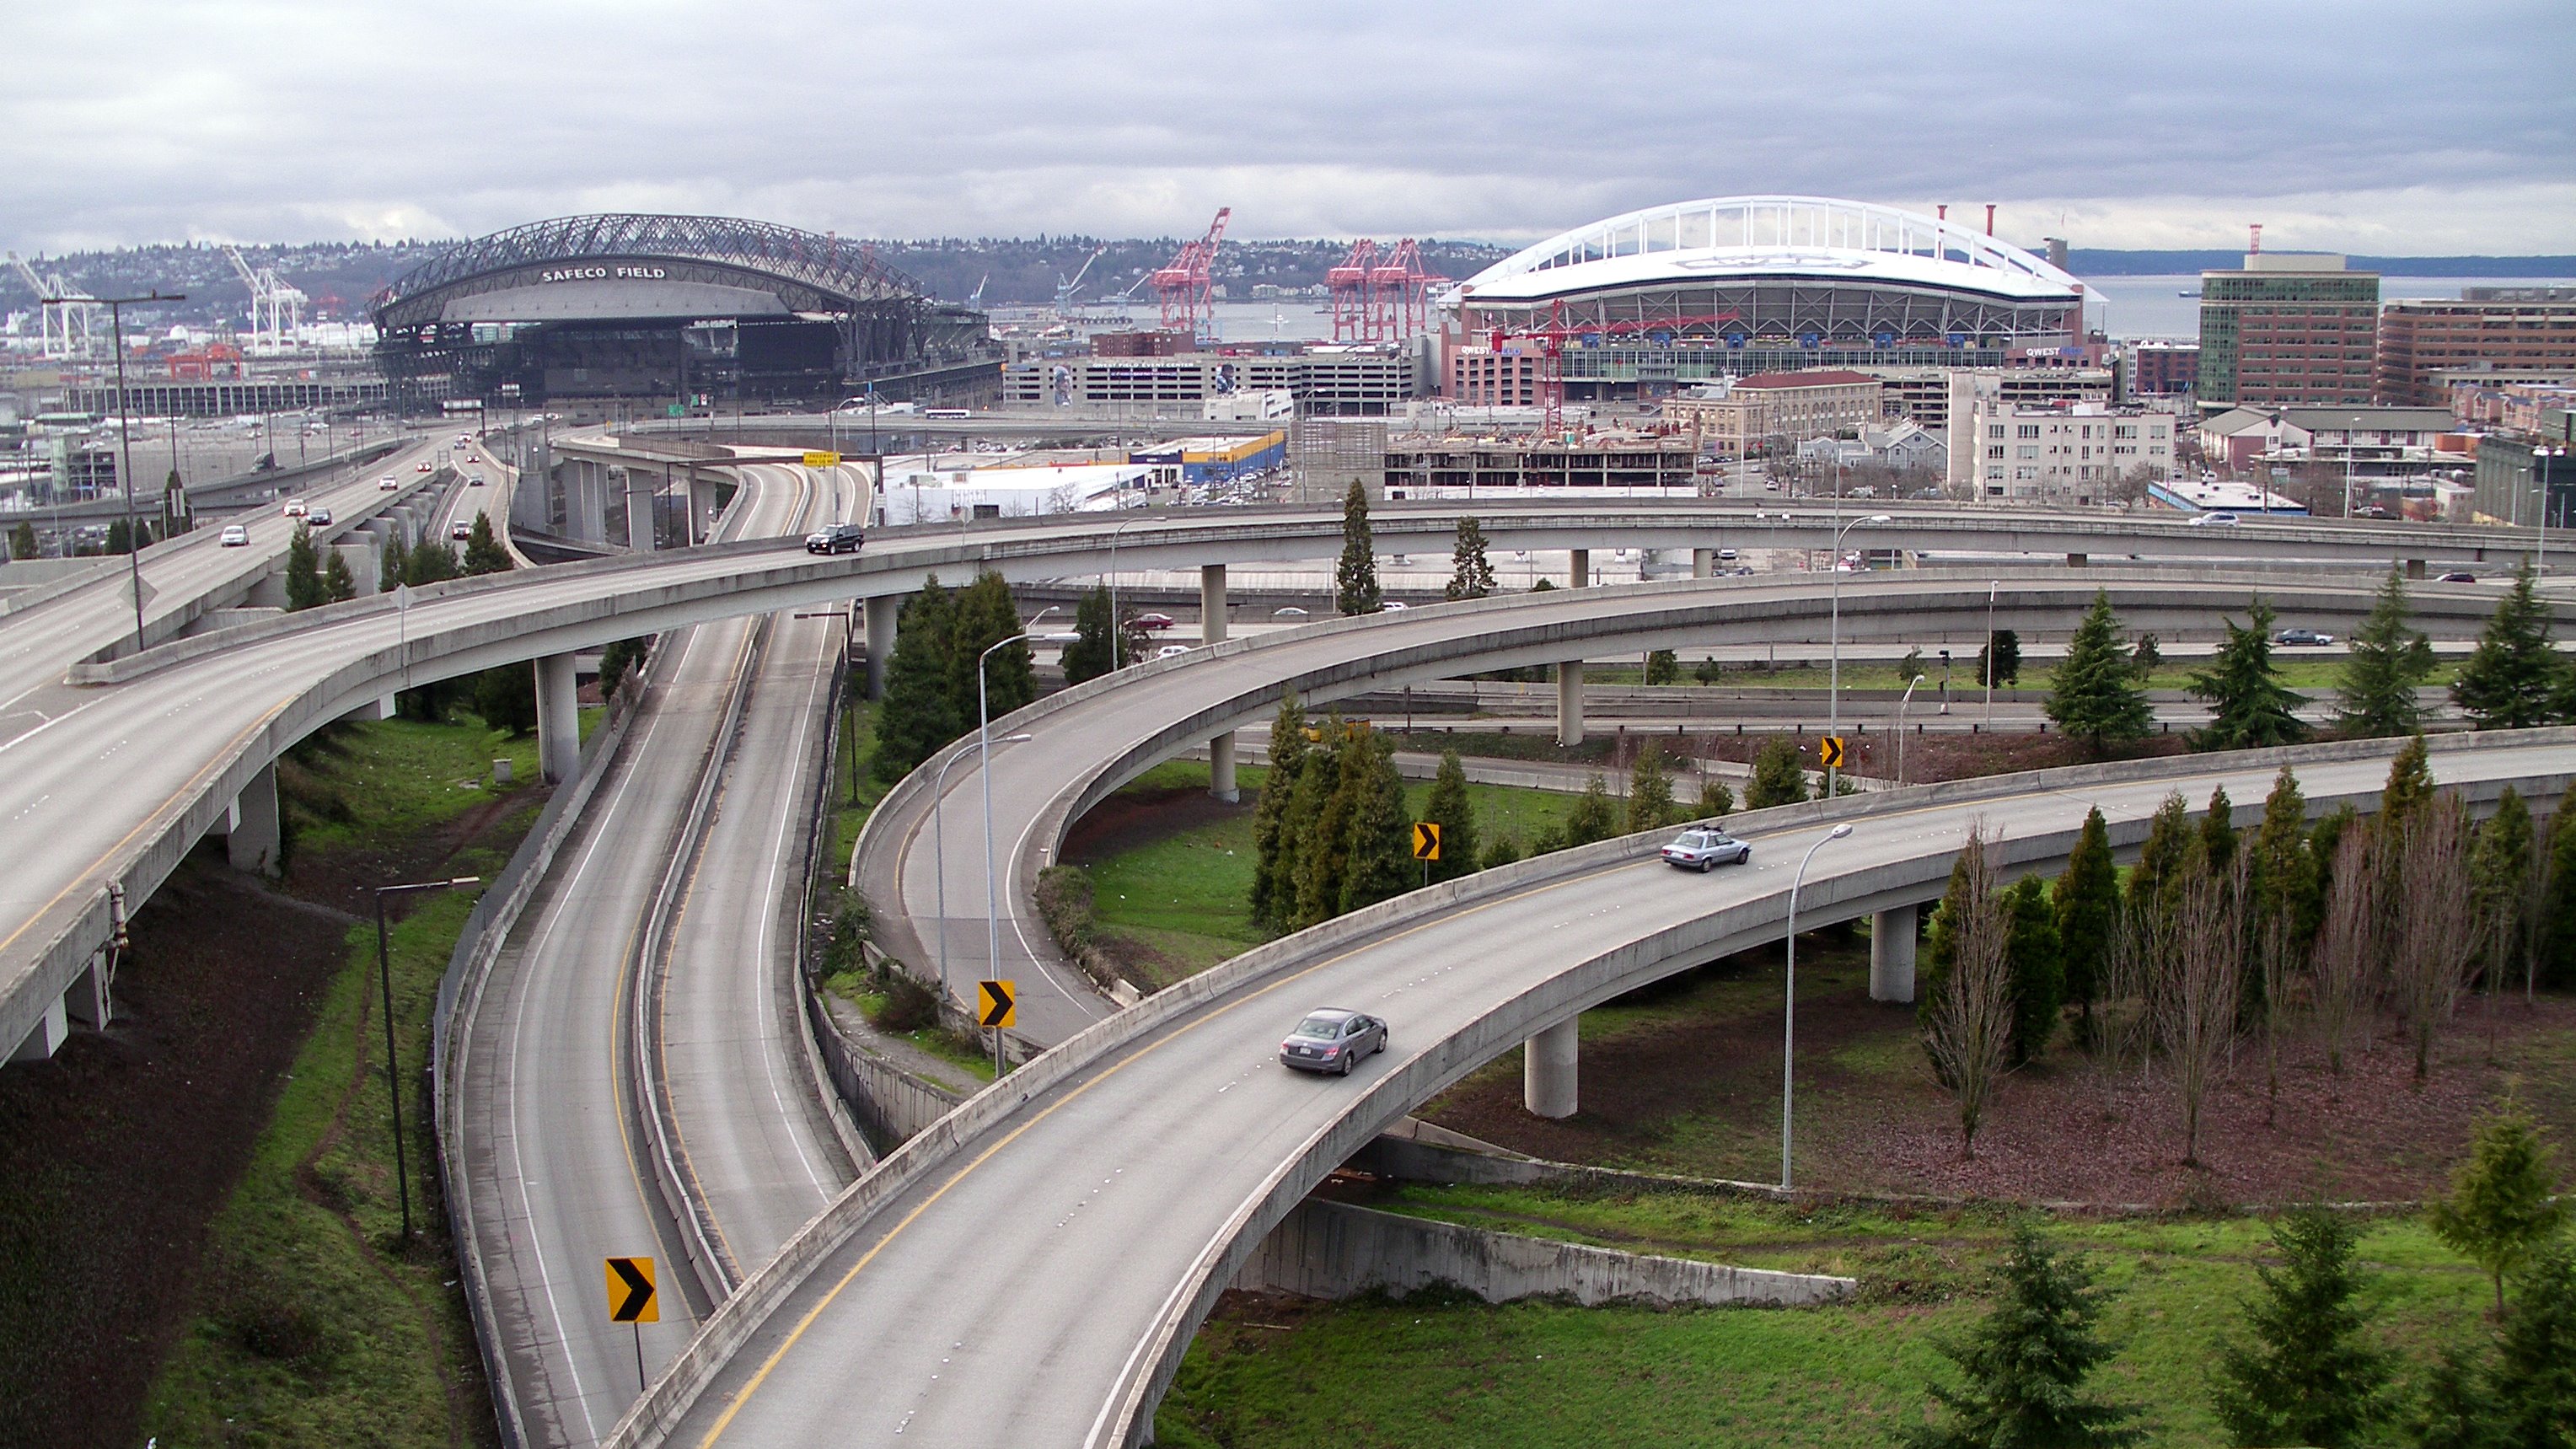 Photo of two interstate highways, Interstate 90 and Interstate 5, merging in a mixmaster. Taken by Matthew Rutledge and released under a Creative Commons Attribution 2.0 Generic license